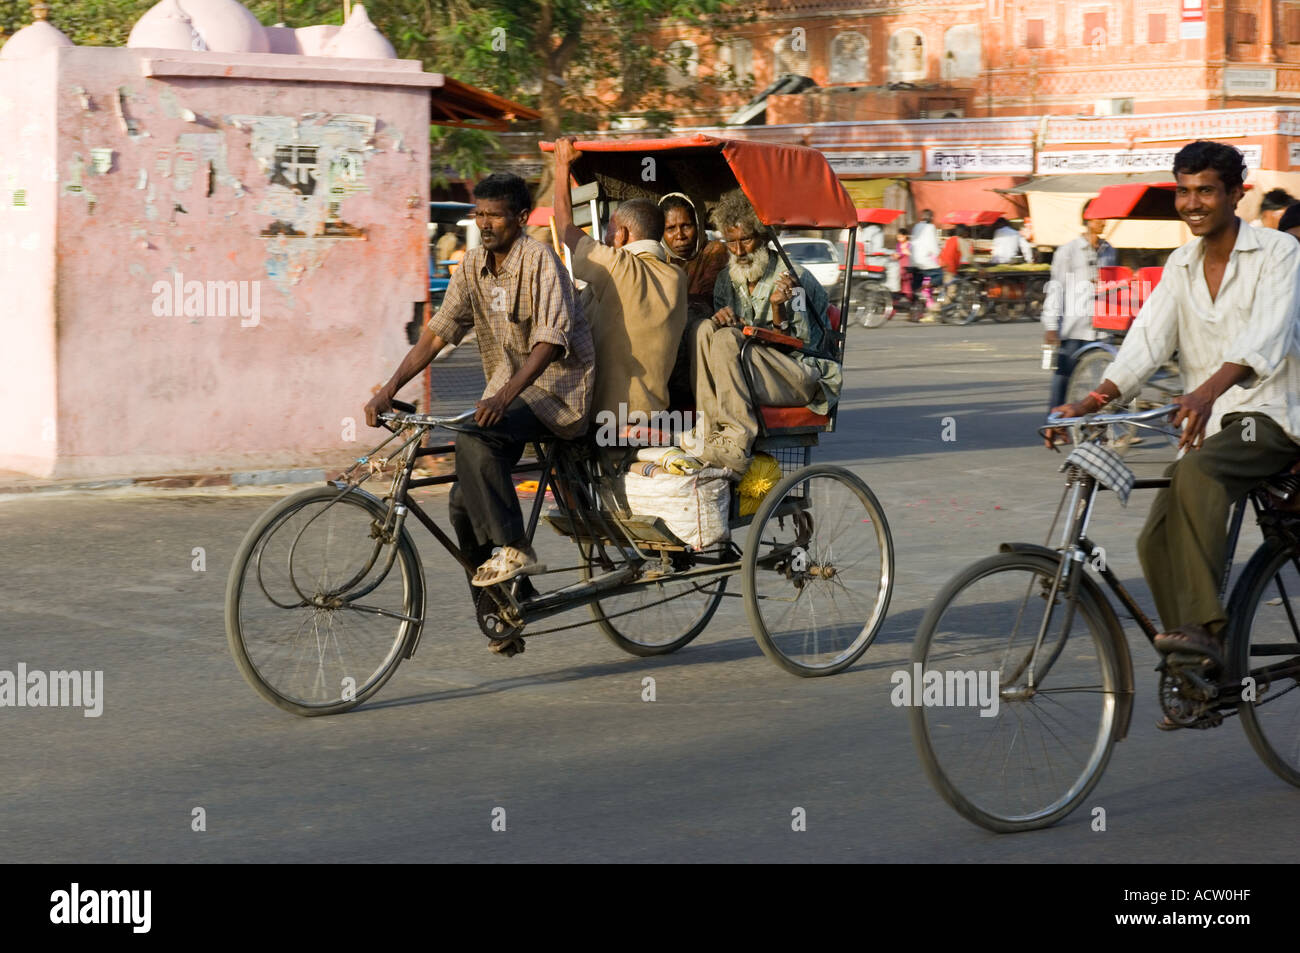 Several people squashed onto a cycle rickshaw and a man cycling in a typical street scene in Jaipur. Stock Photo